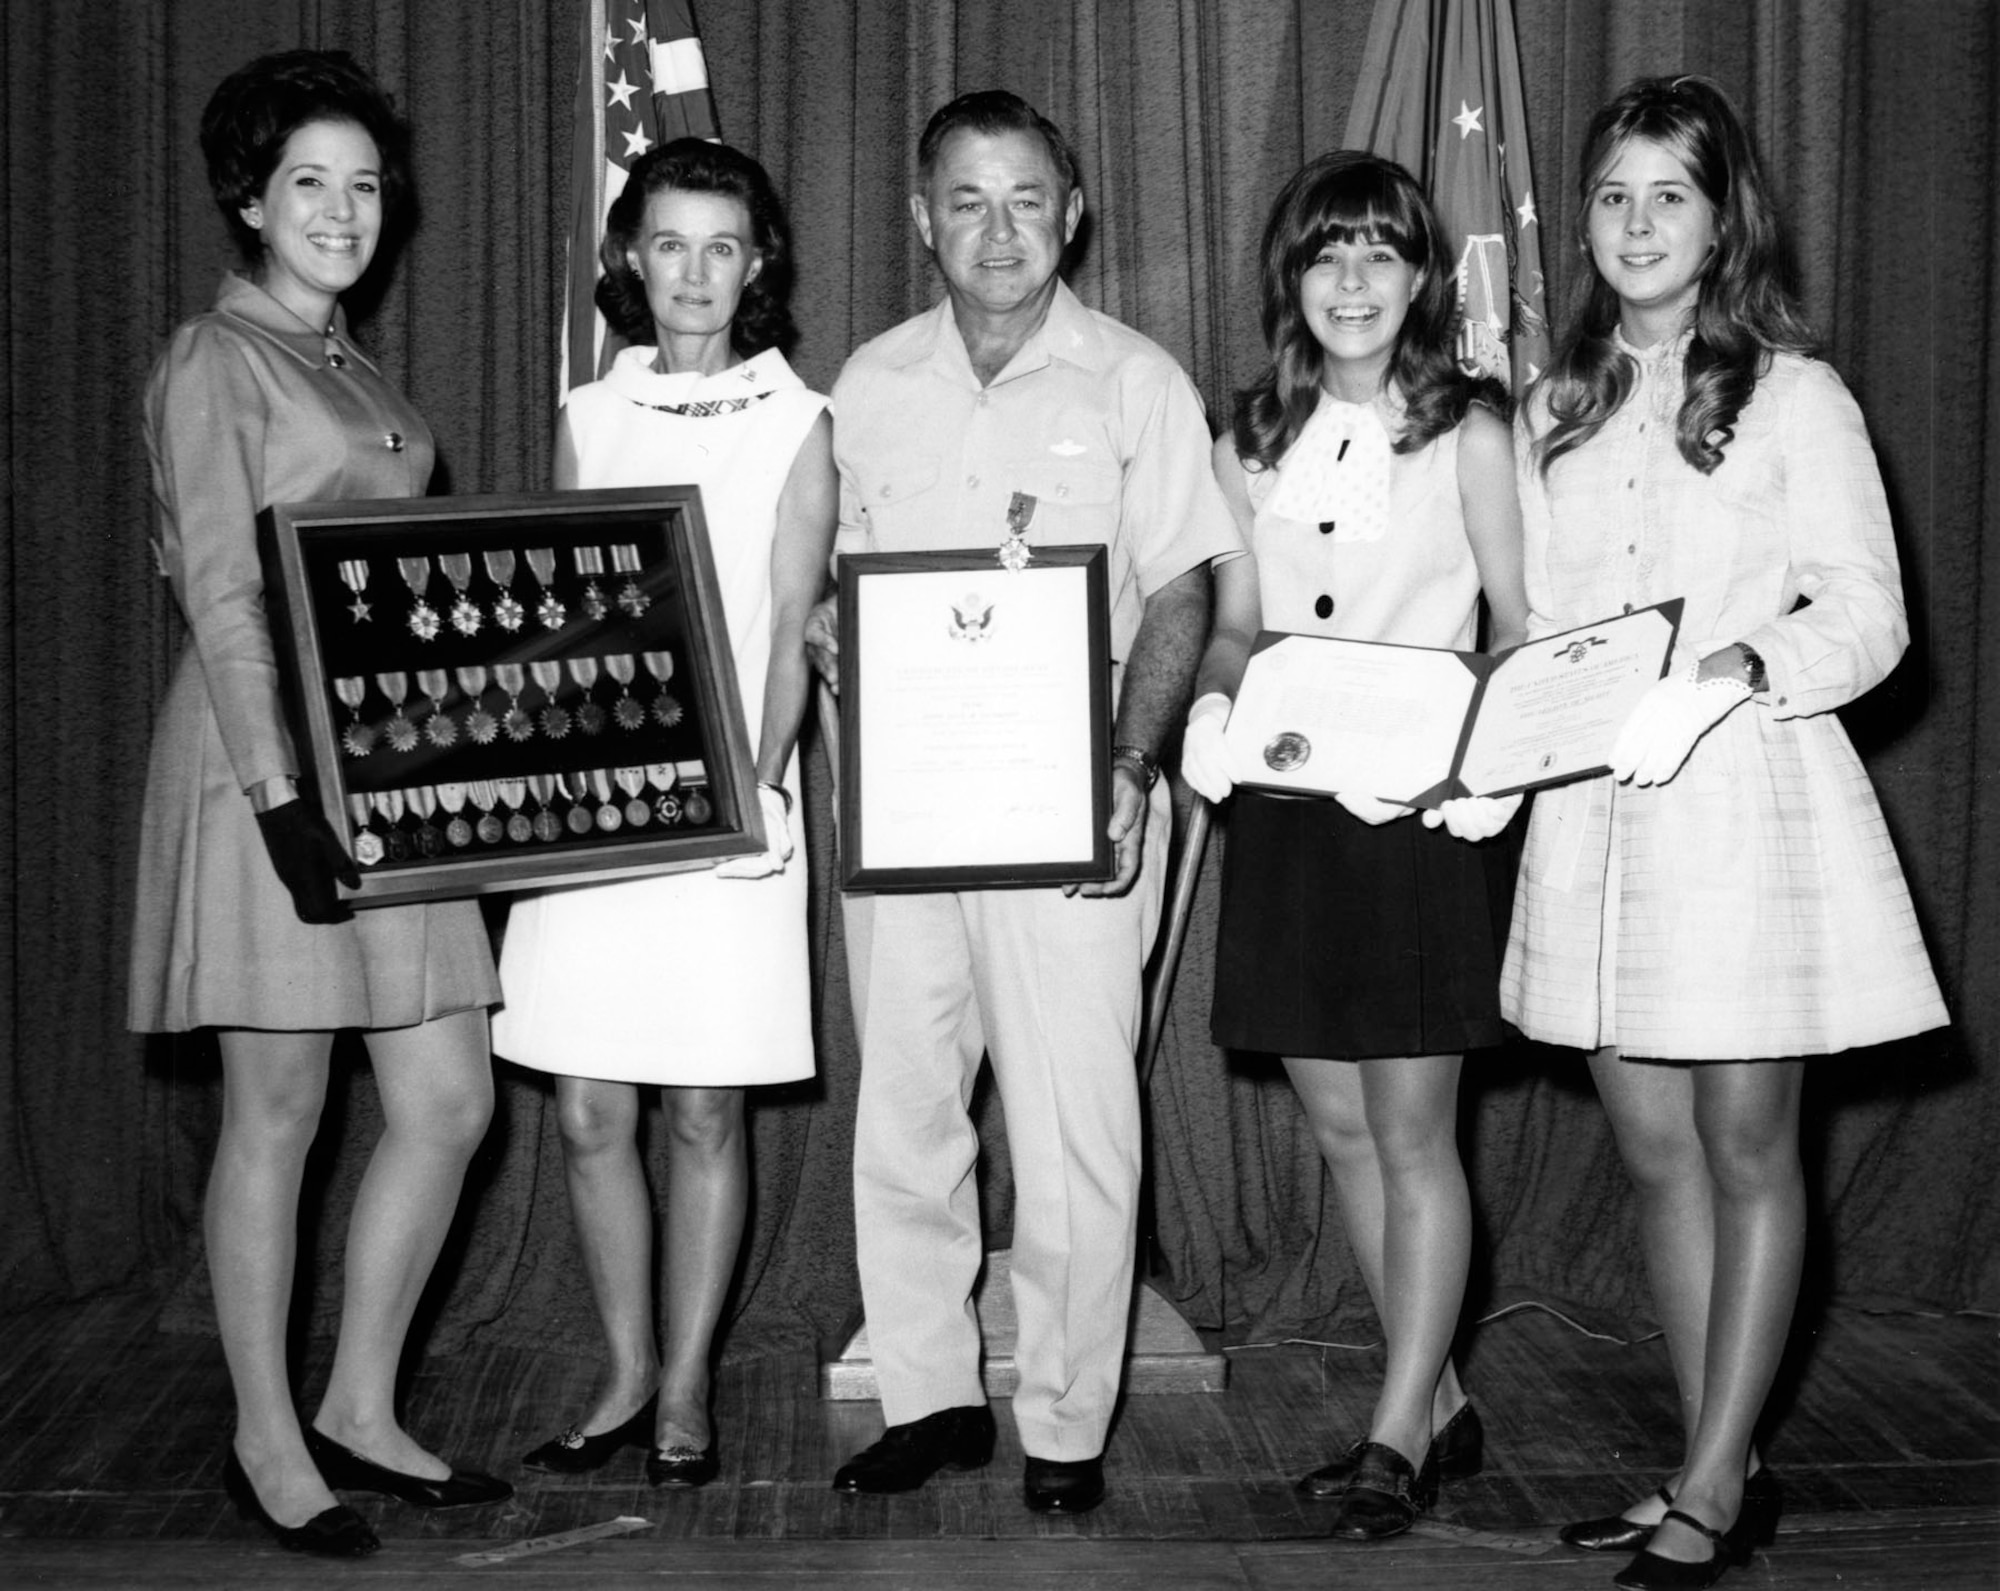 Col. Joe Davis Jr. at his retirement from the U.S. Air Force with his "Four Queens," (left to right) daughter Scott, wife Ann, and daughters Chris and Jan in 1969. (U.S. Air Force photo)